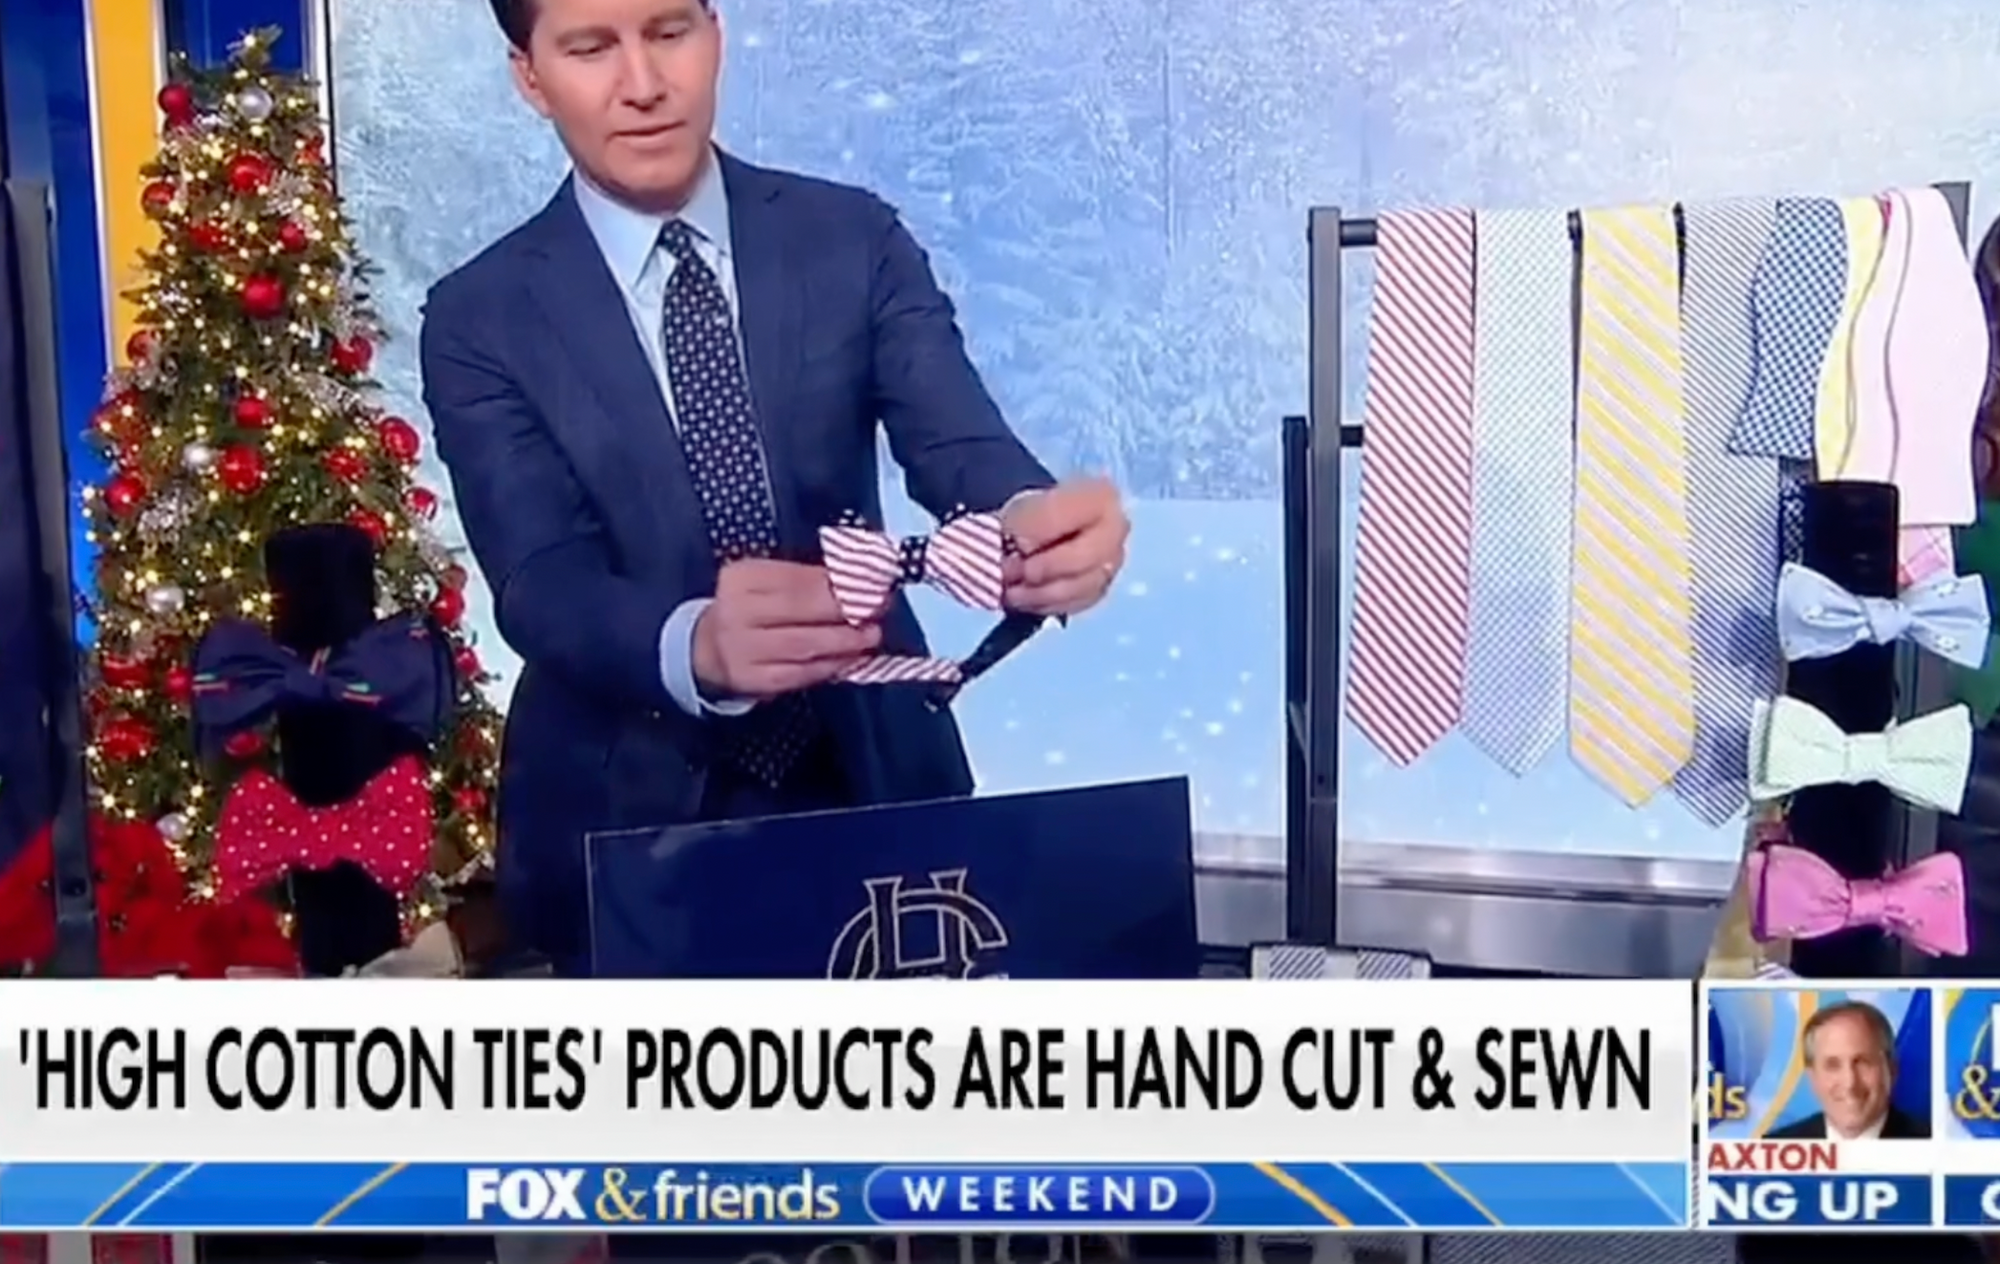 High Cotton Ties Featured on Fox & Friends Weekend Show